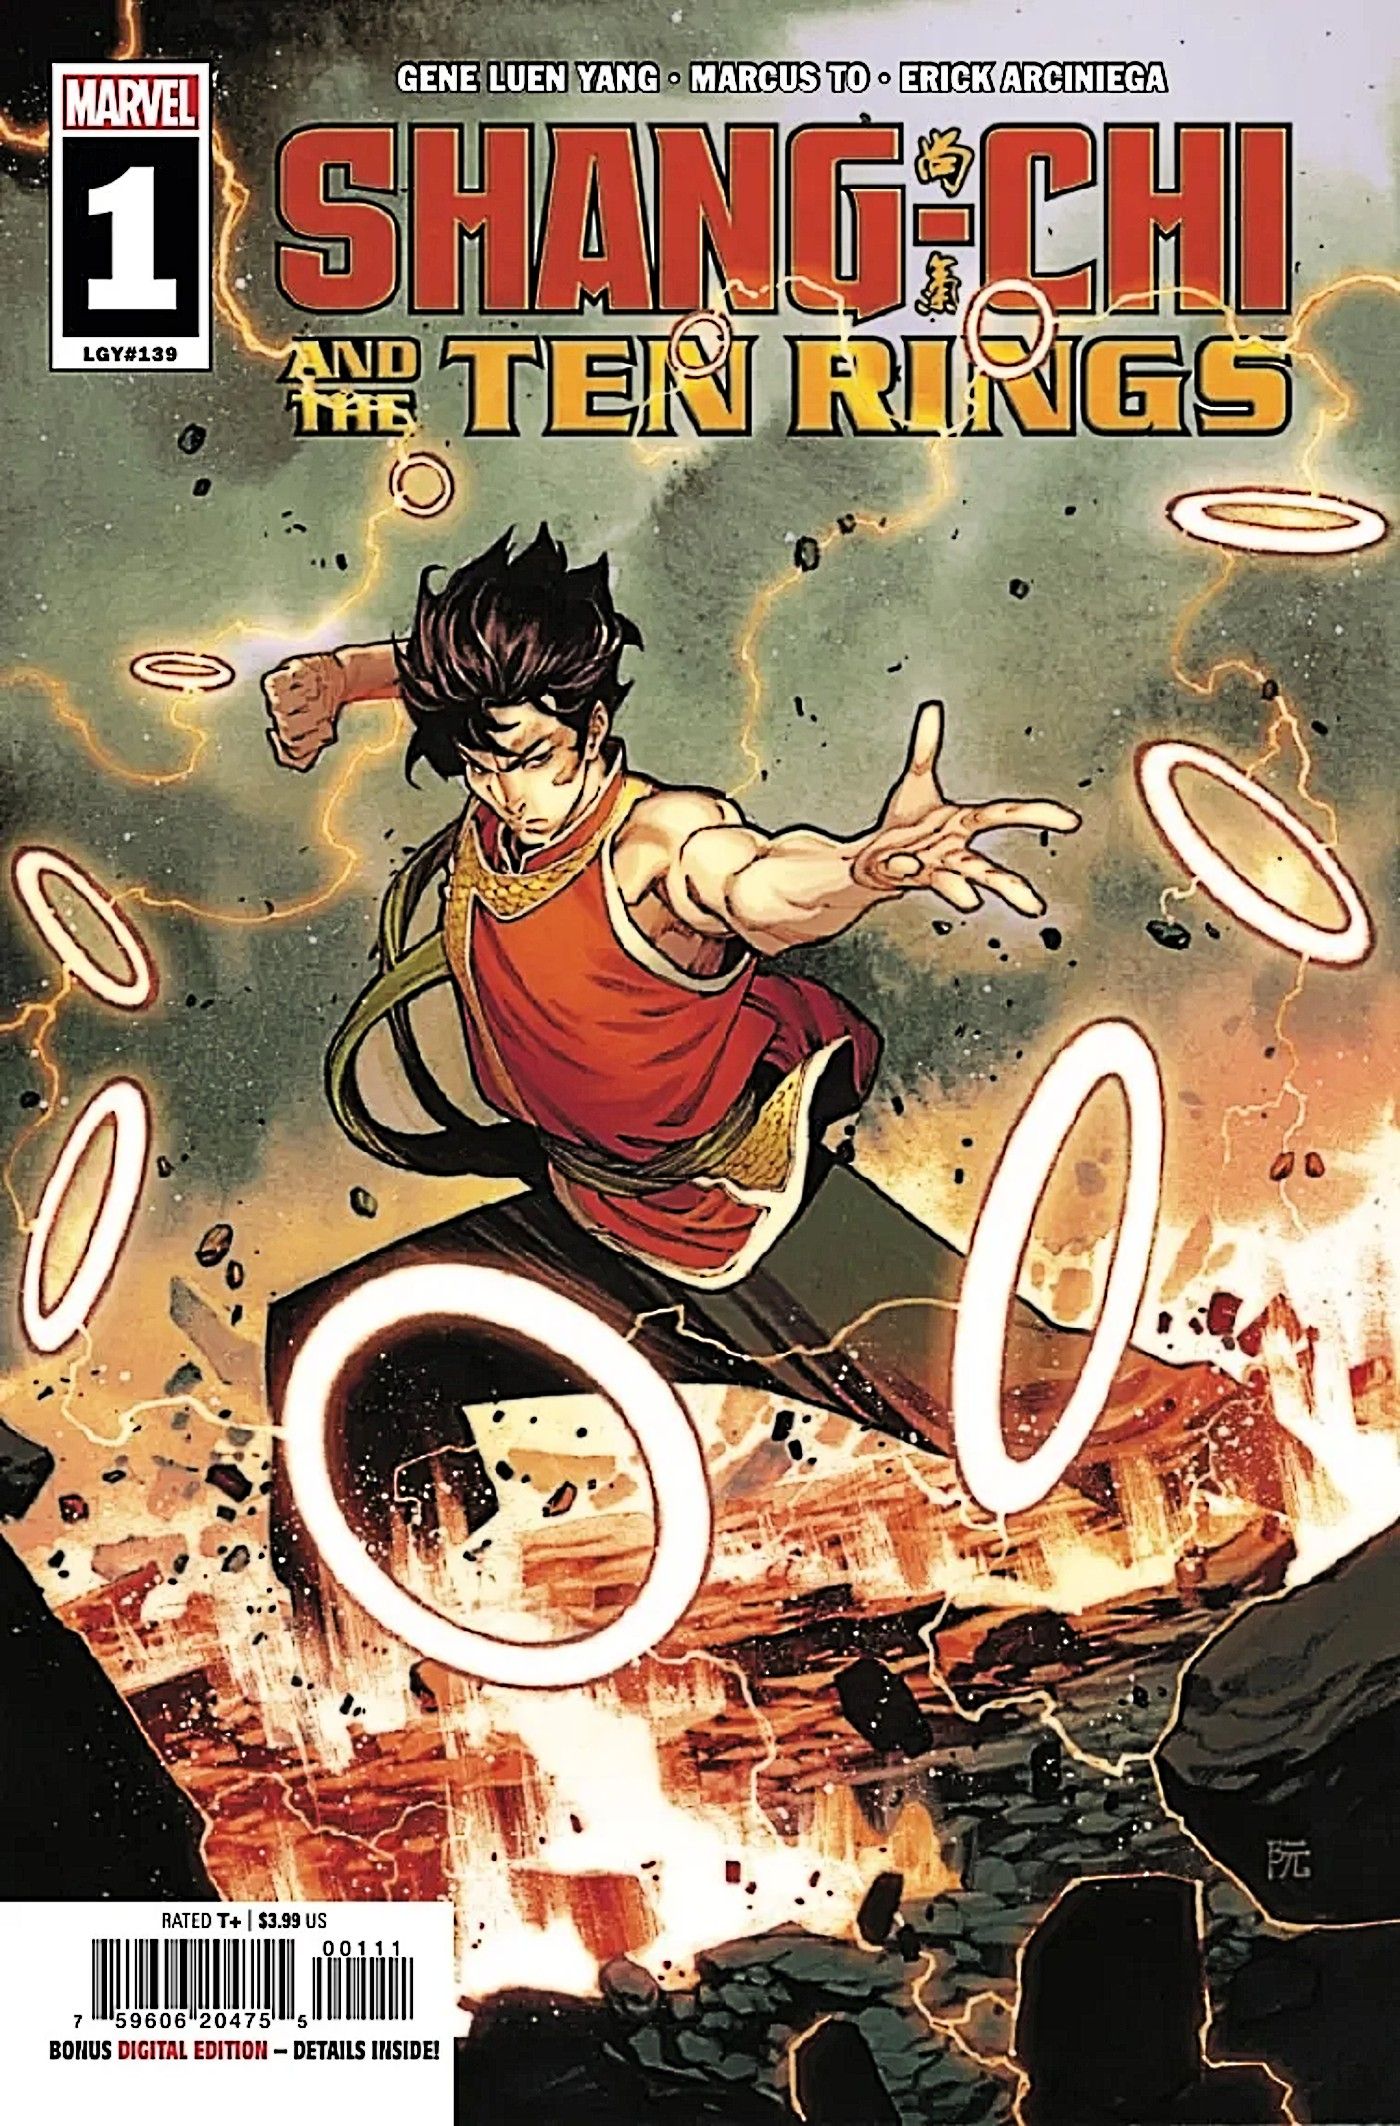 Shang-Chi And The Ten Rings #1, cover by Dike Ruan